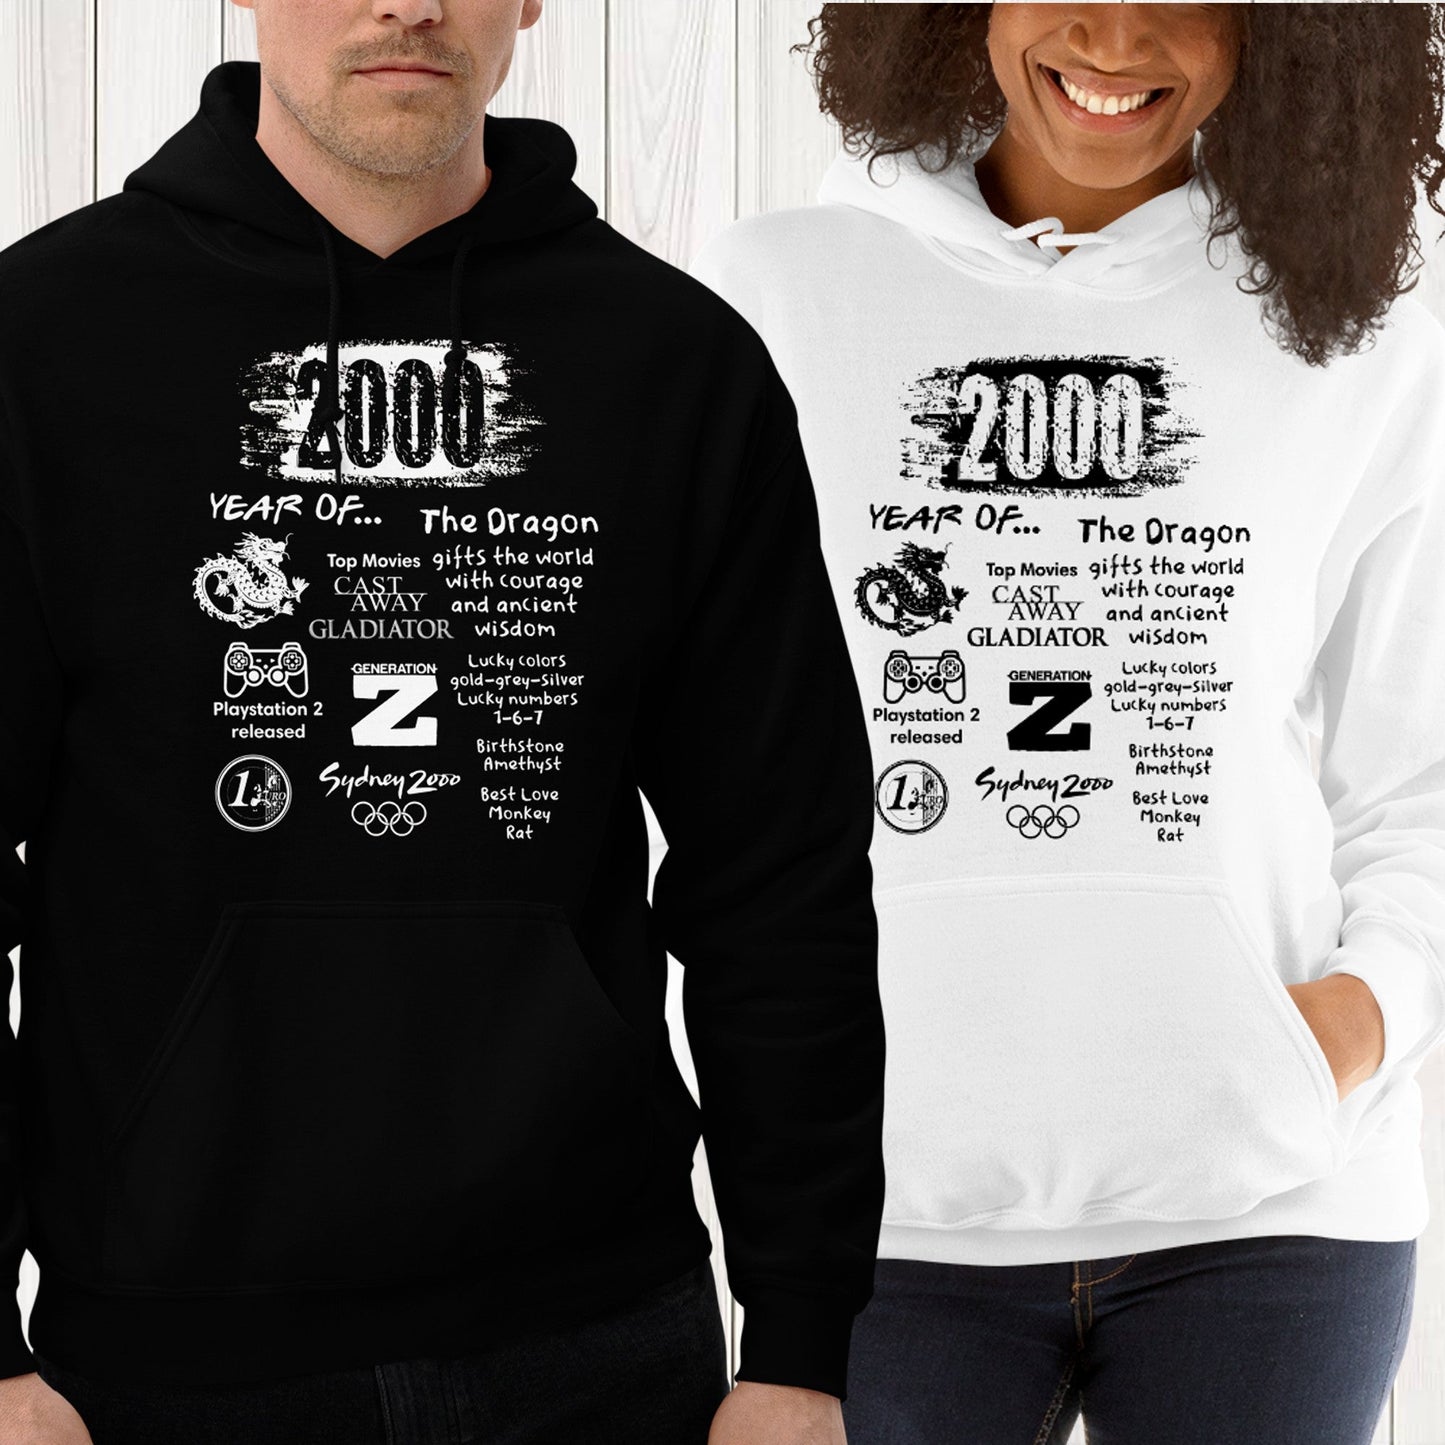 1988 TShirt and Hoodie is a Creative Graphic design for Men and Women